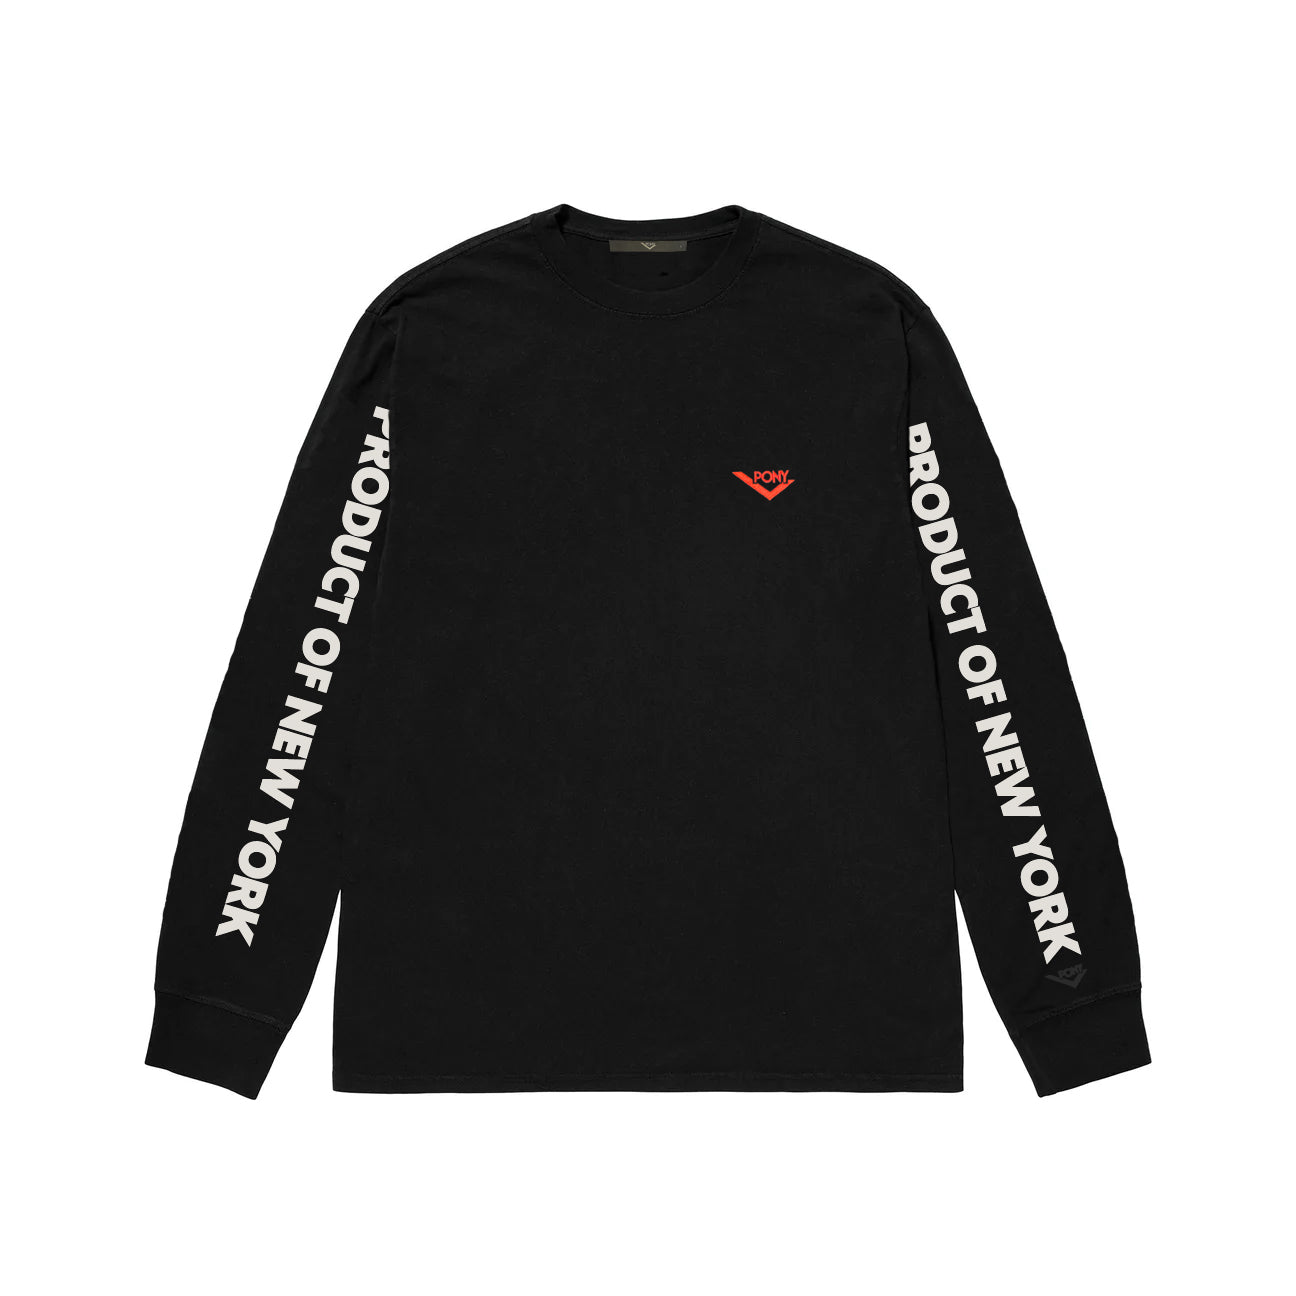 PONY longsleeve shirt. All black longsleeve with black ribbed cuffs. Featuring red pony lockup on chest right. PRODUCT OF NEW YORK in white Futura font on the inside of left and right sleeves.